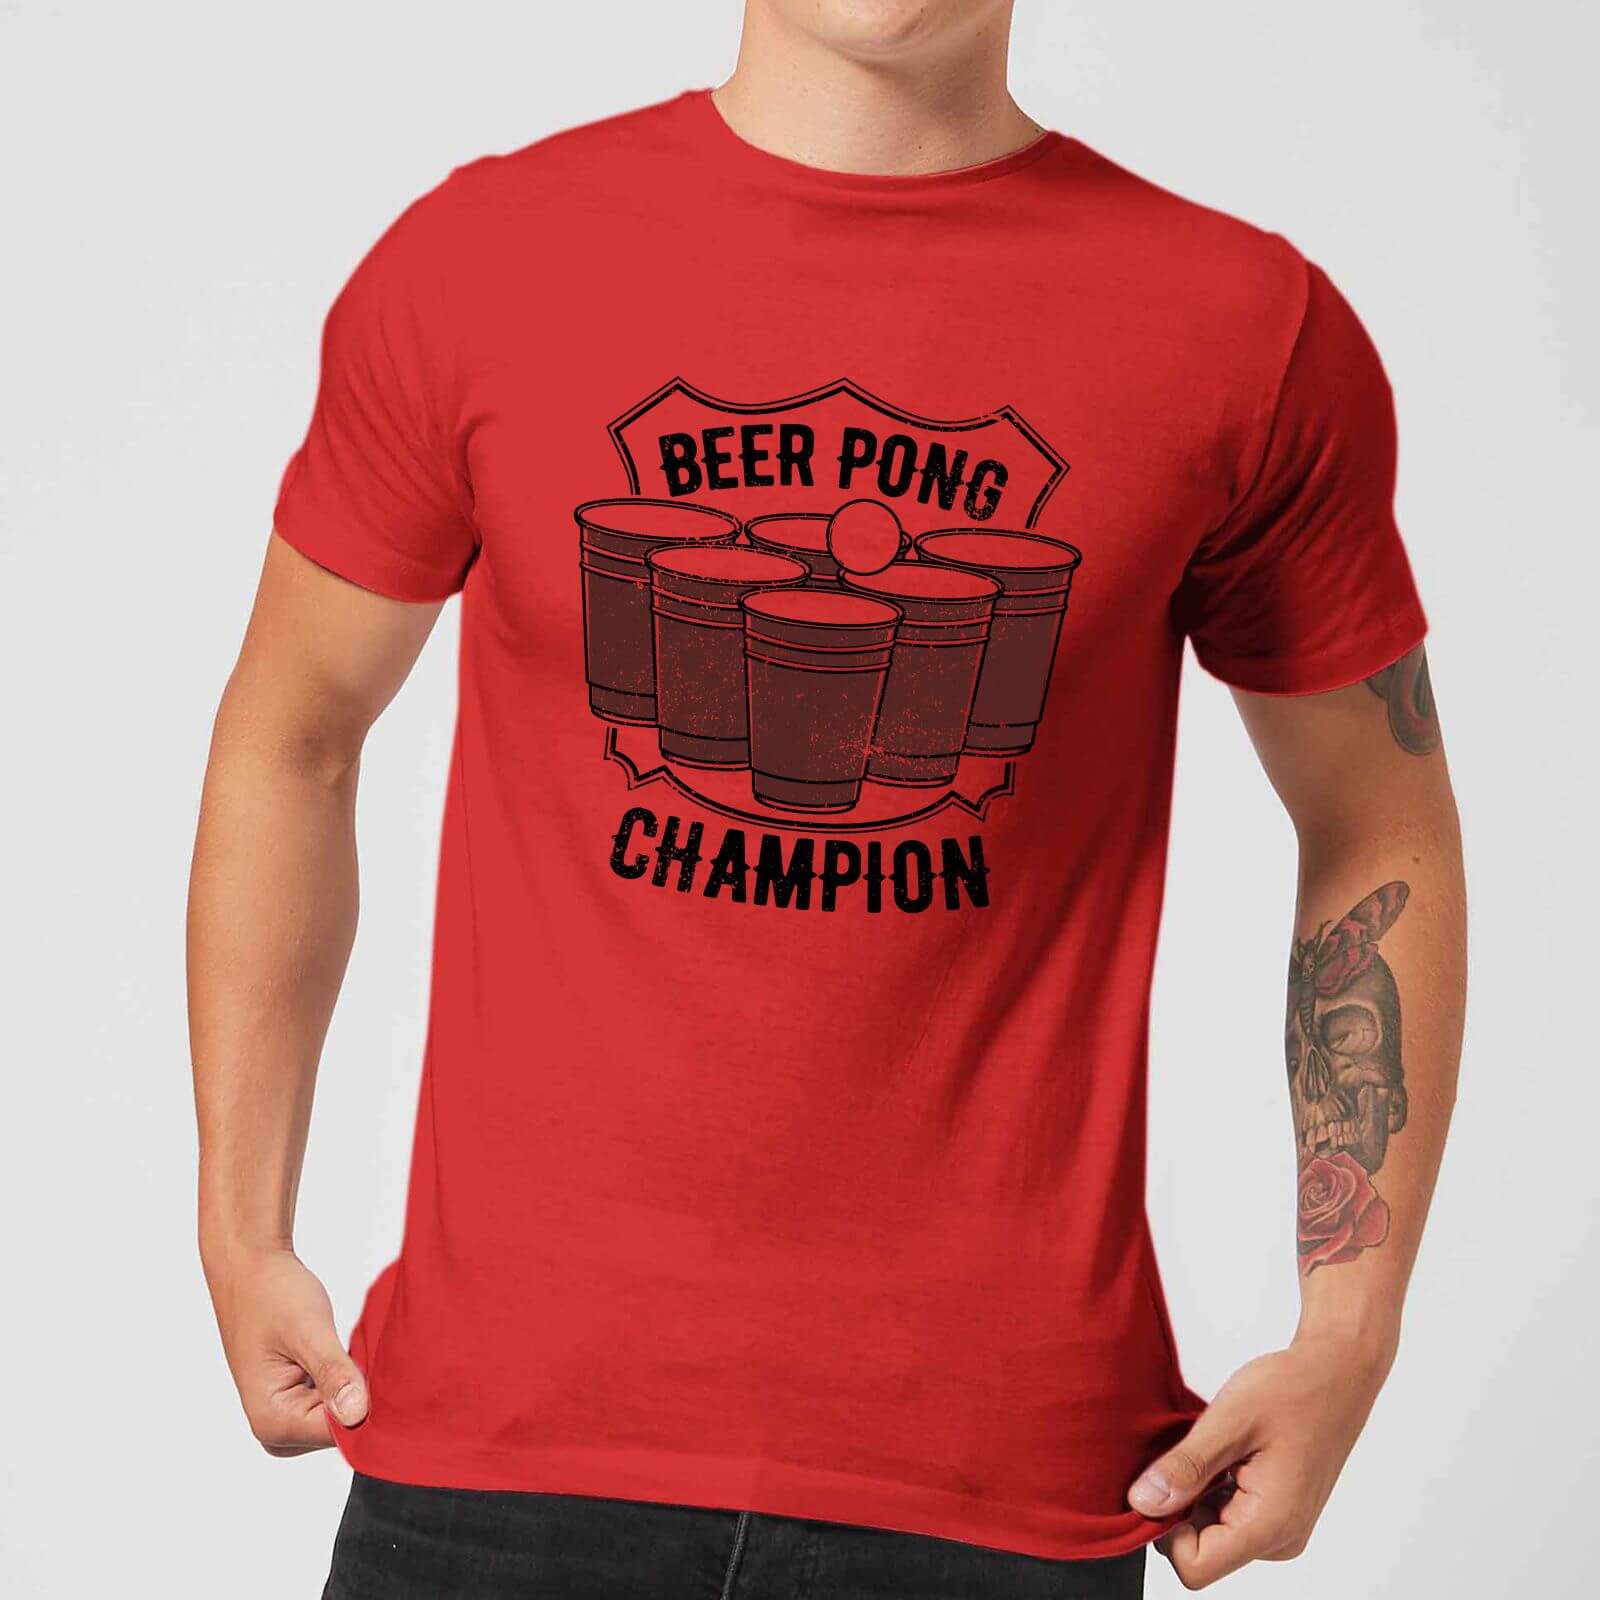 Beershield Beer Pong Champion T-Shirt - Red - S - Red